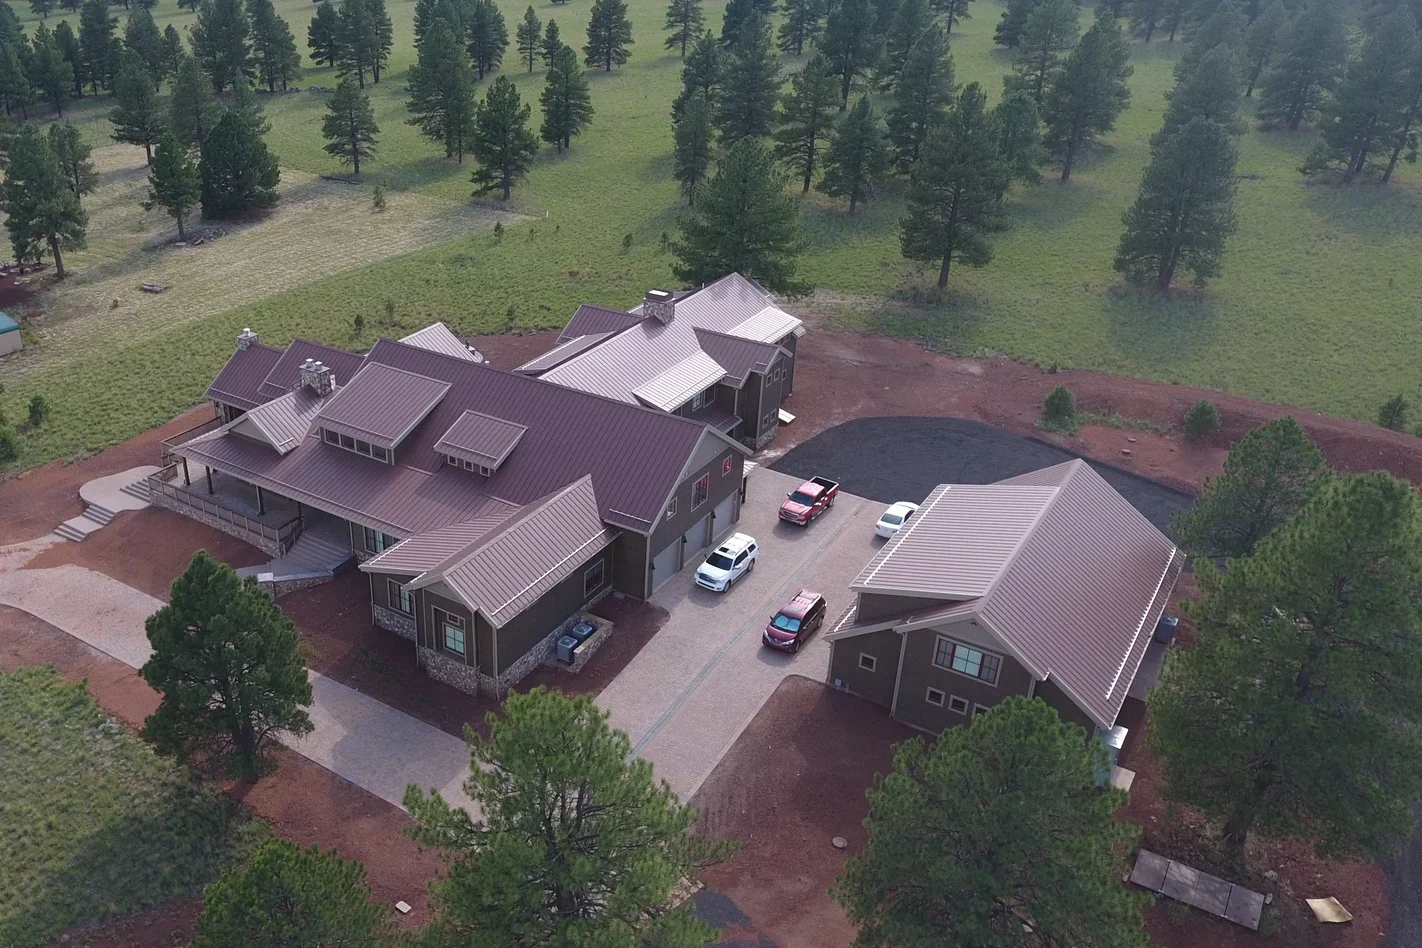 aerial view of sprawling home of SIP construction, surrounded by large outbuilding, fields and pines - photo